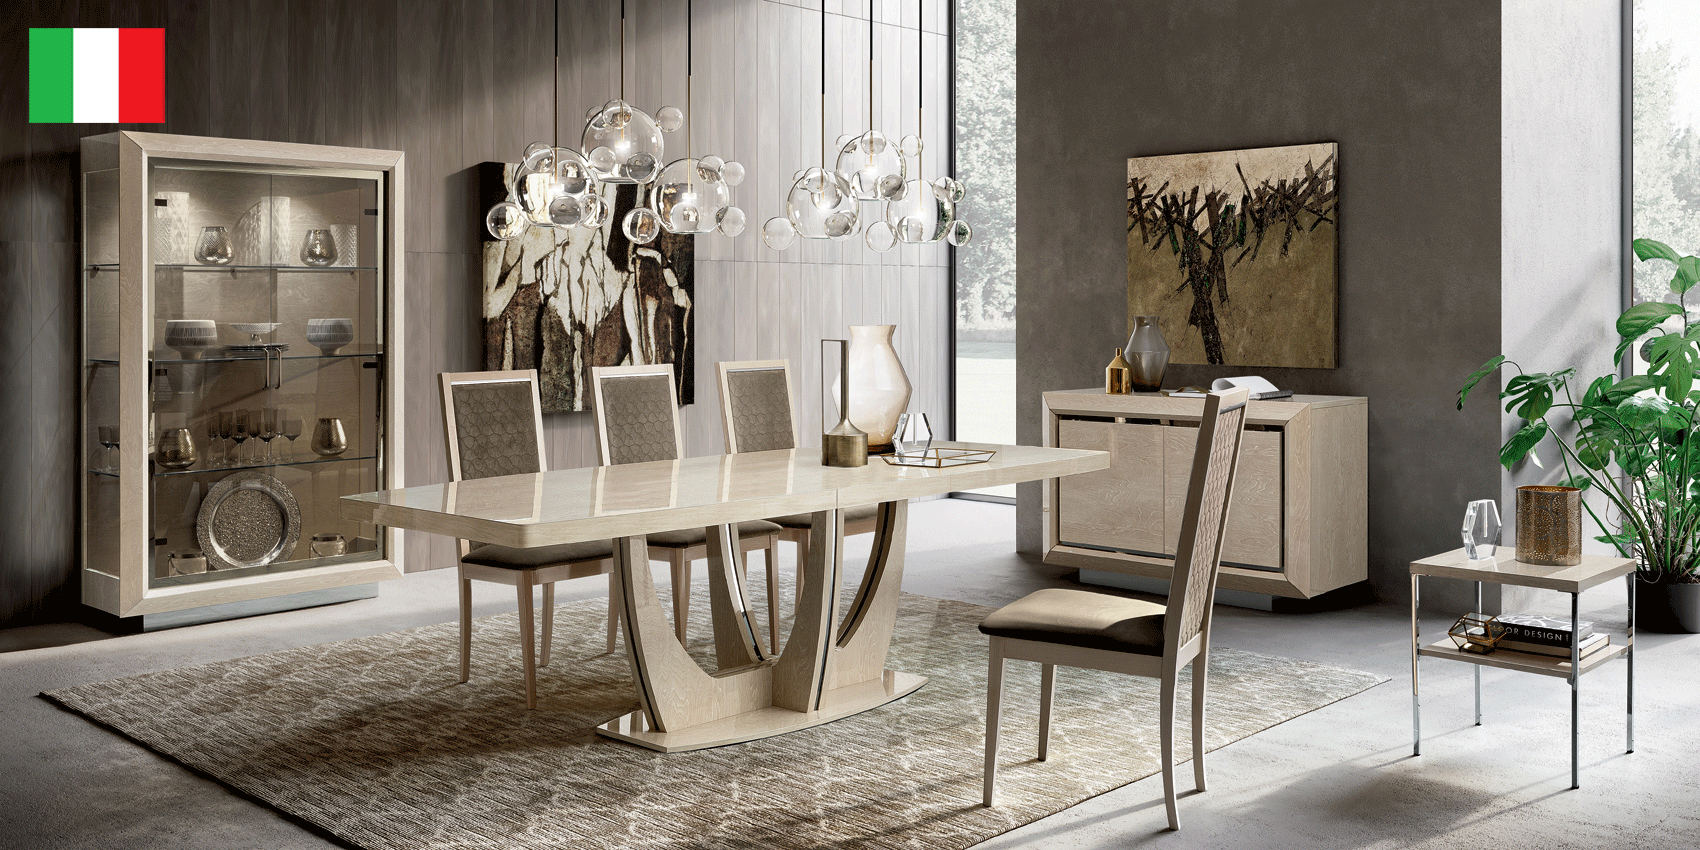 Brands Fama Modern Living Room, Spain Elite Dining Ivory with Ambra “Rombi” Chairs